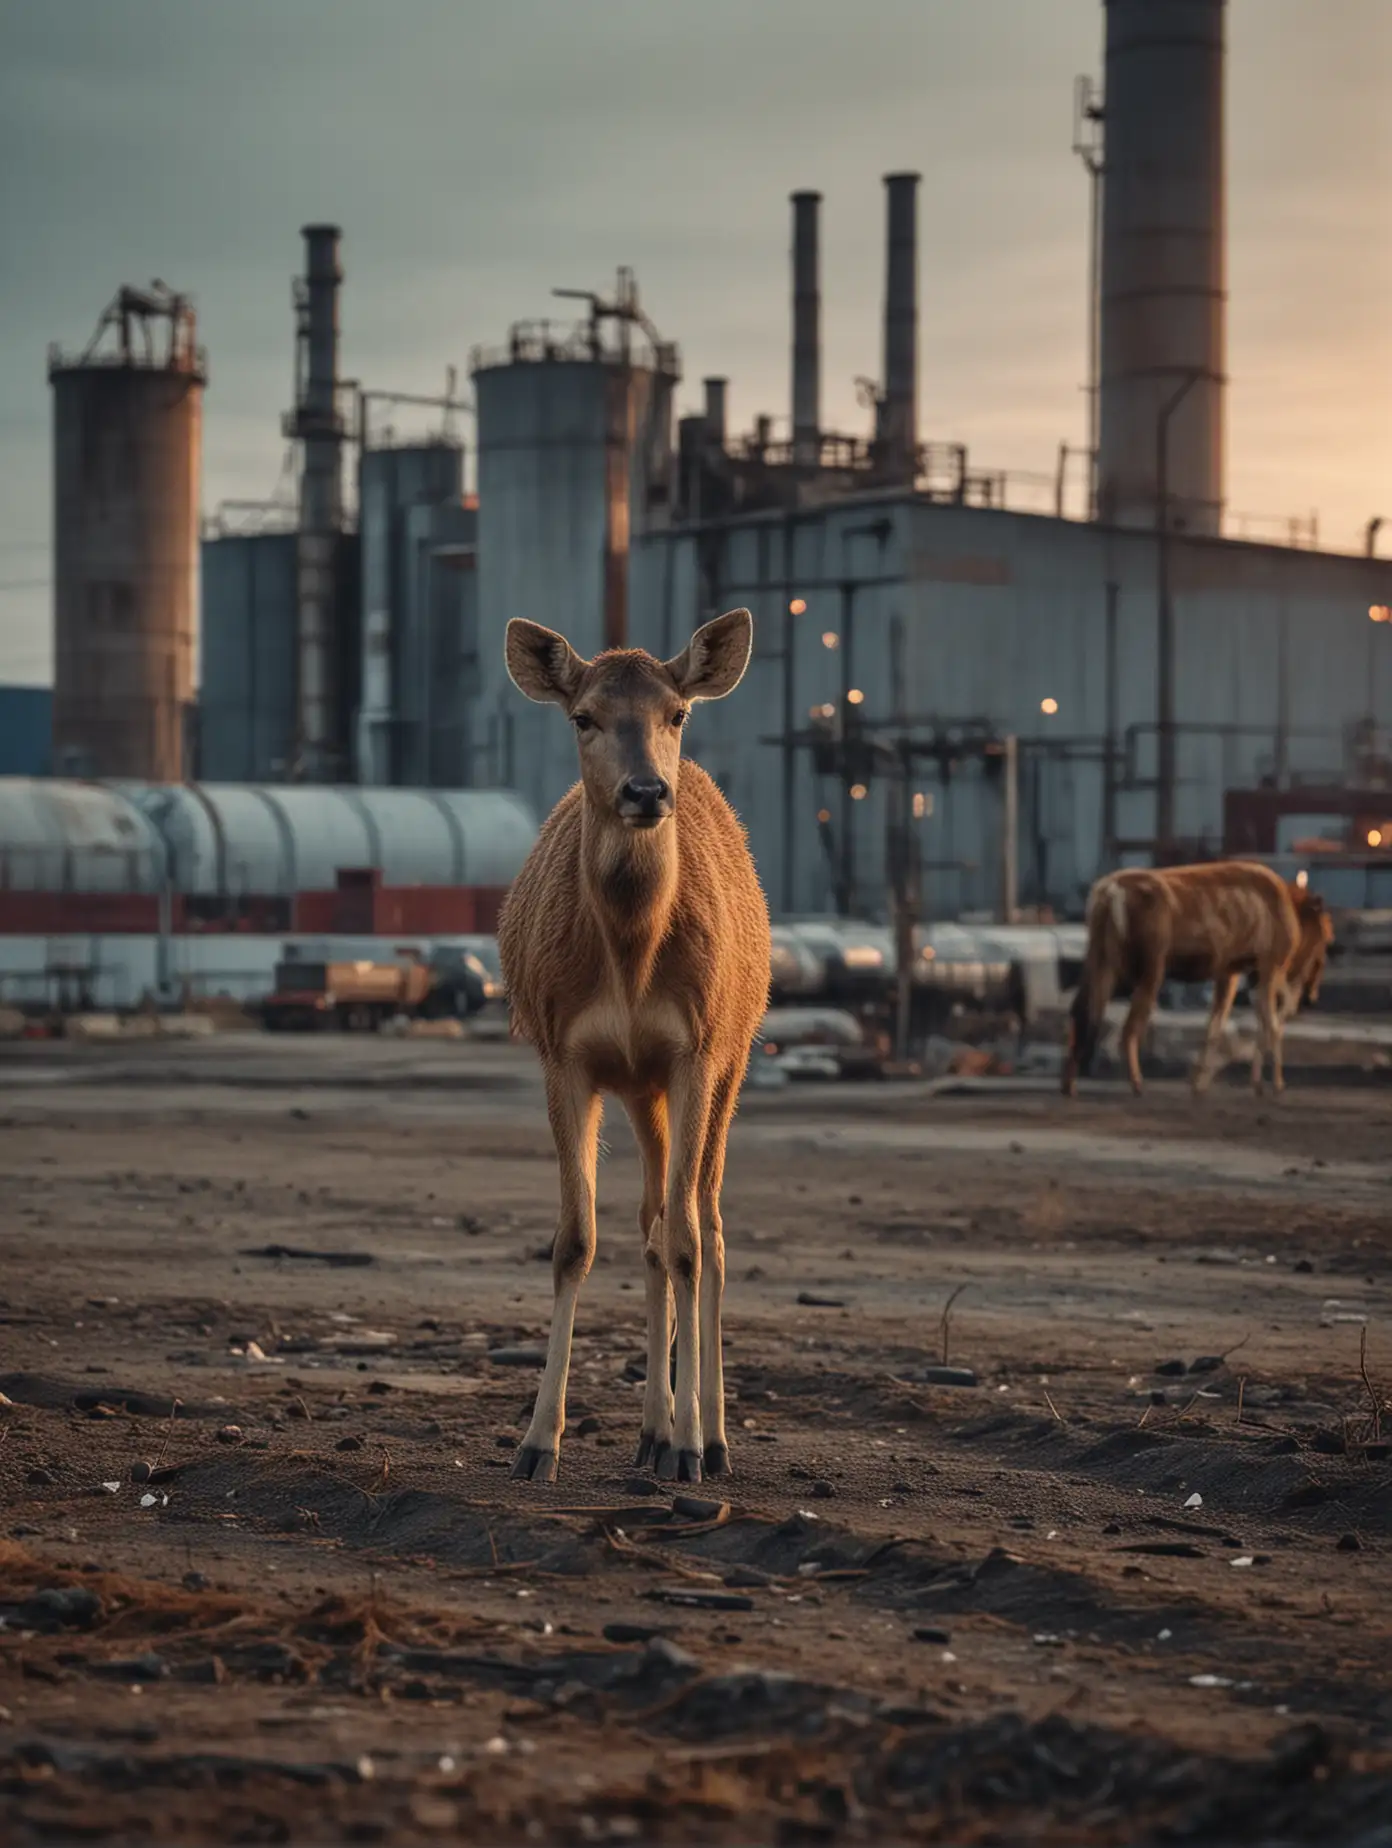 Wild-Animal-by-Industrial-Facility-in-Evening-Light-Atmospheric-Realistic-Photo